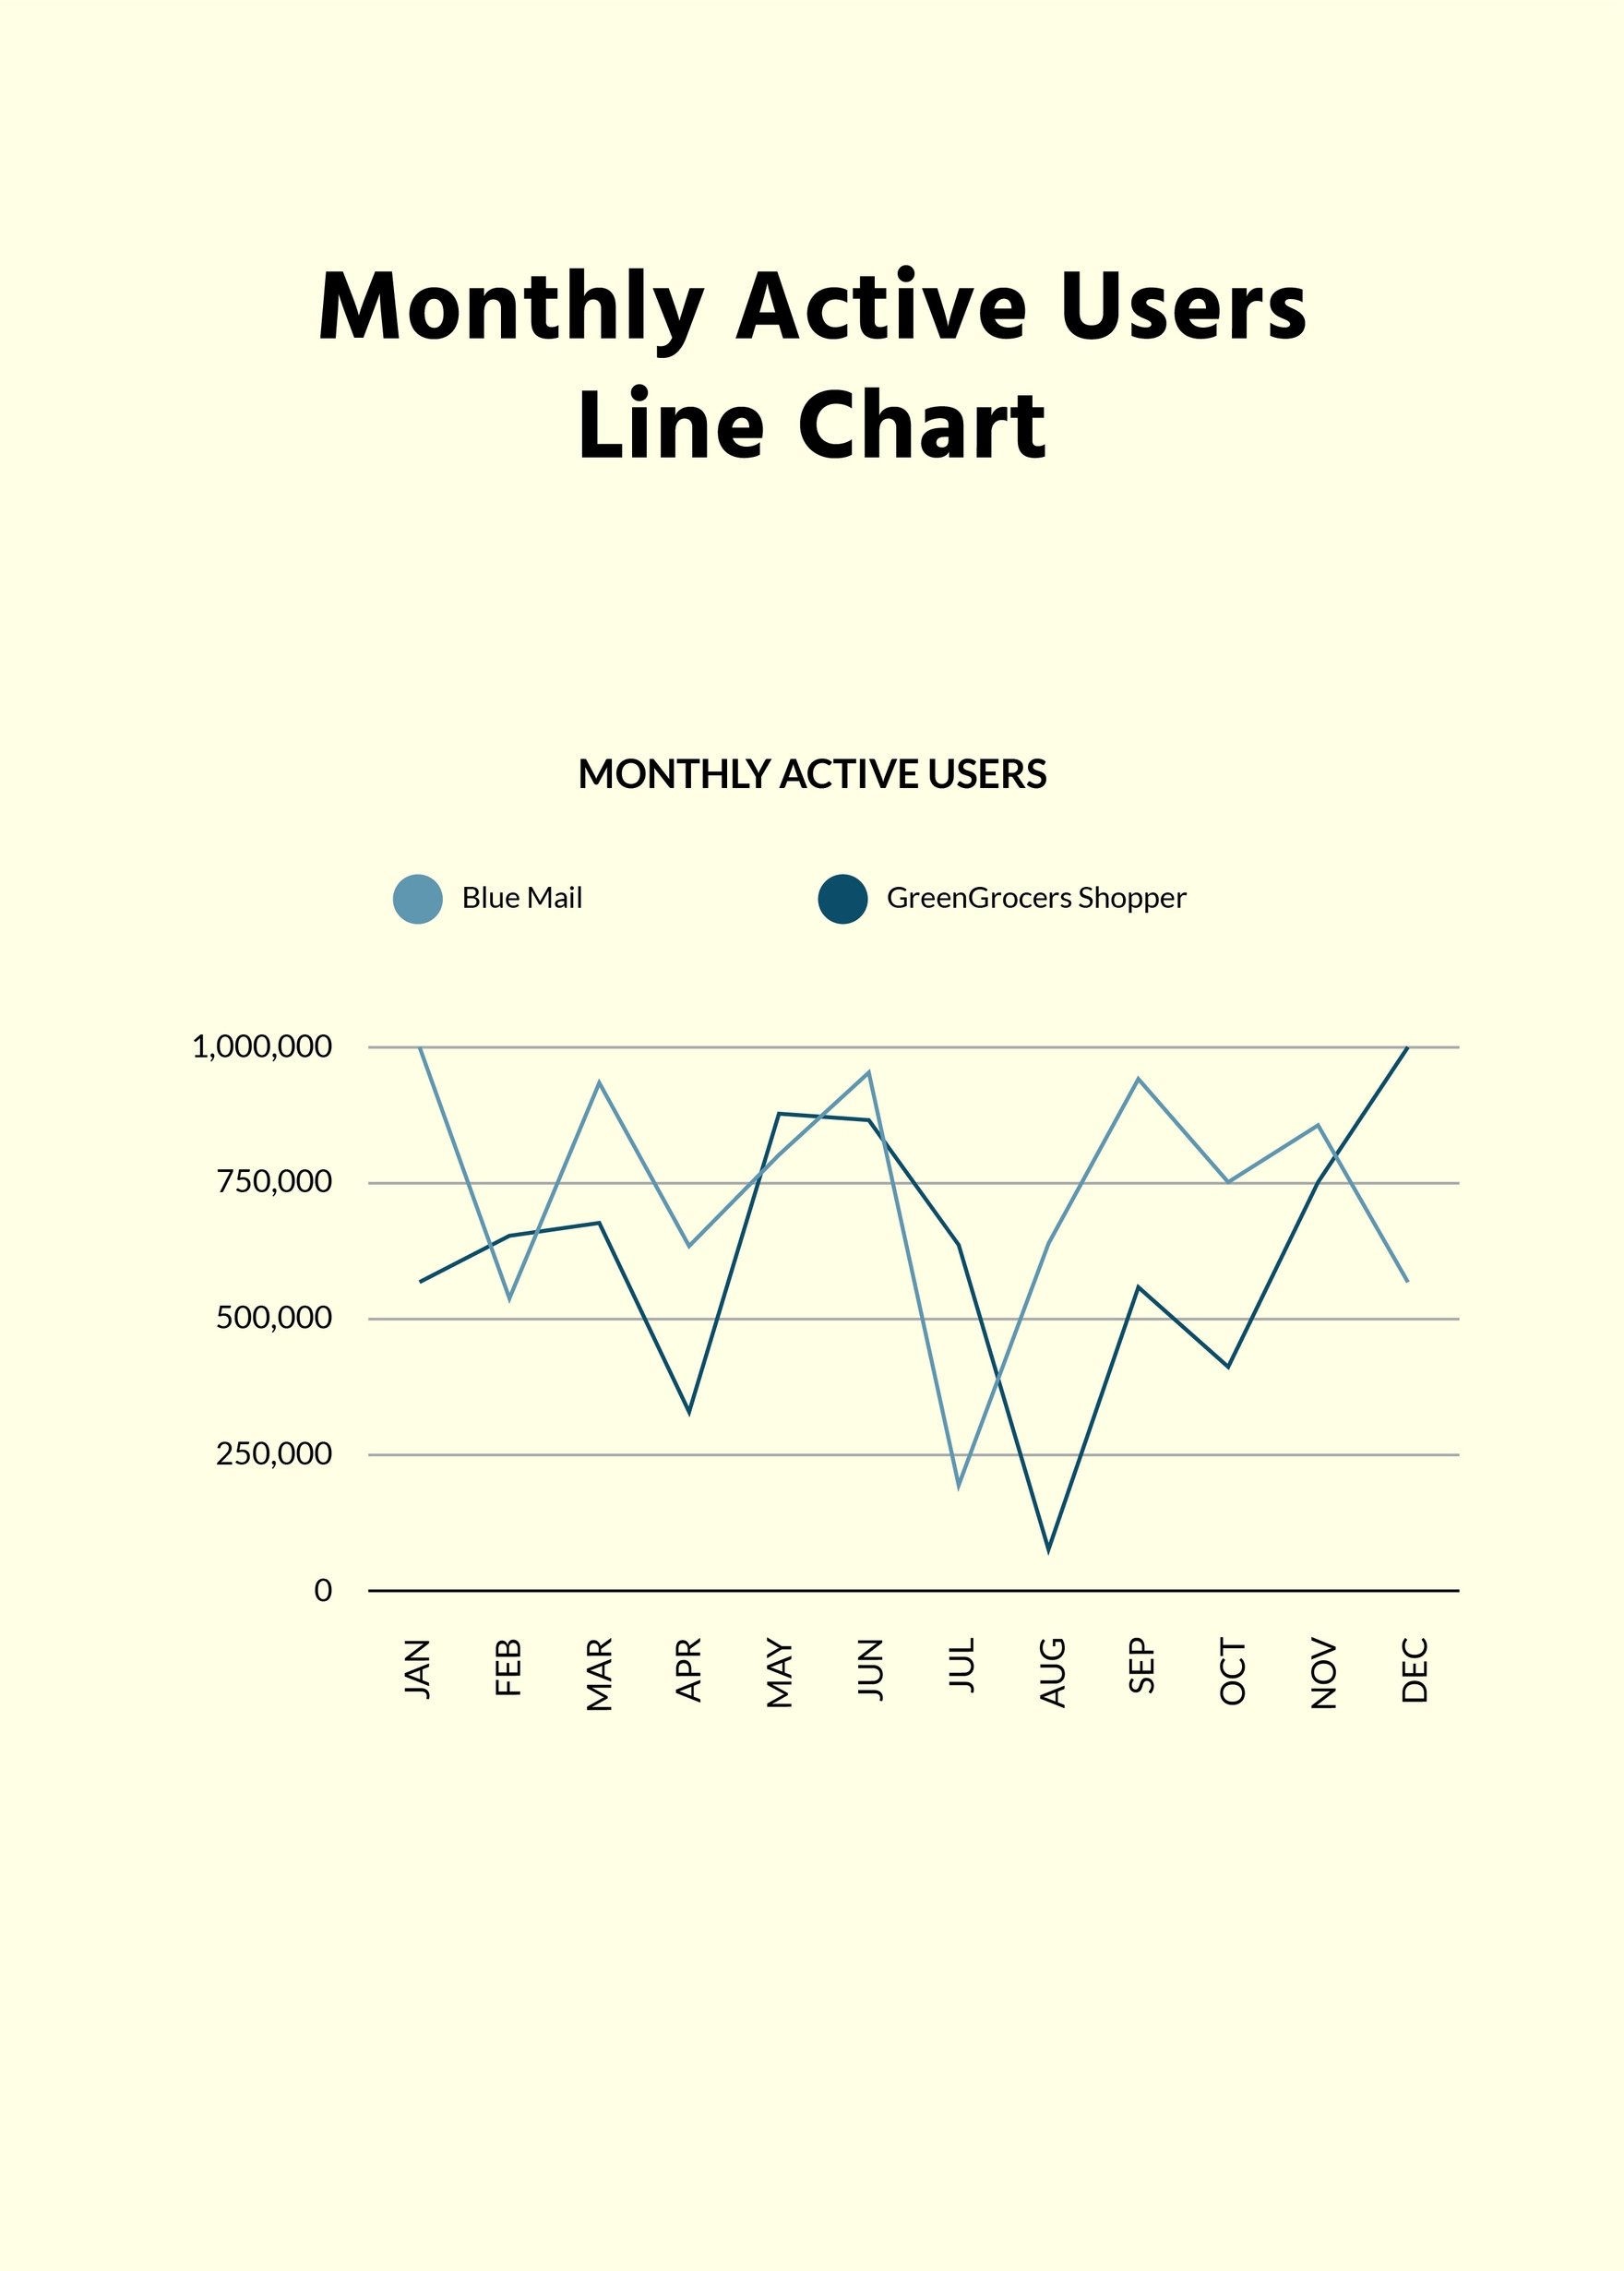 Monthly Active Users Line Chart